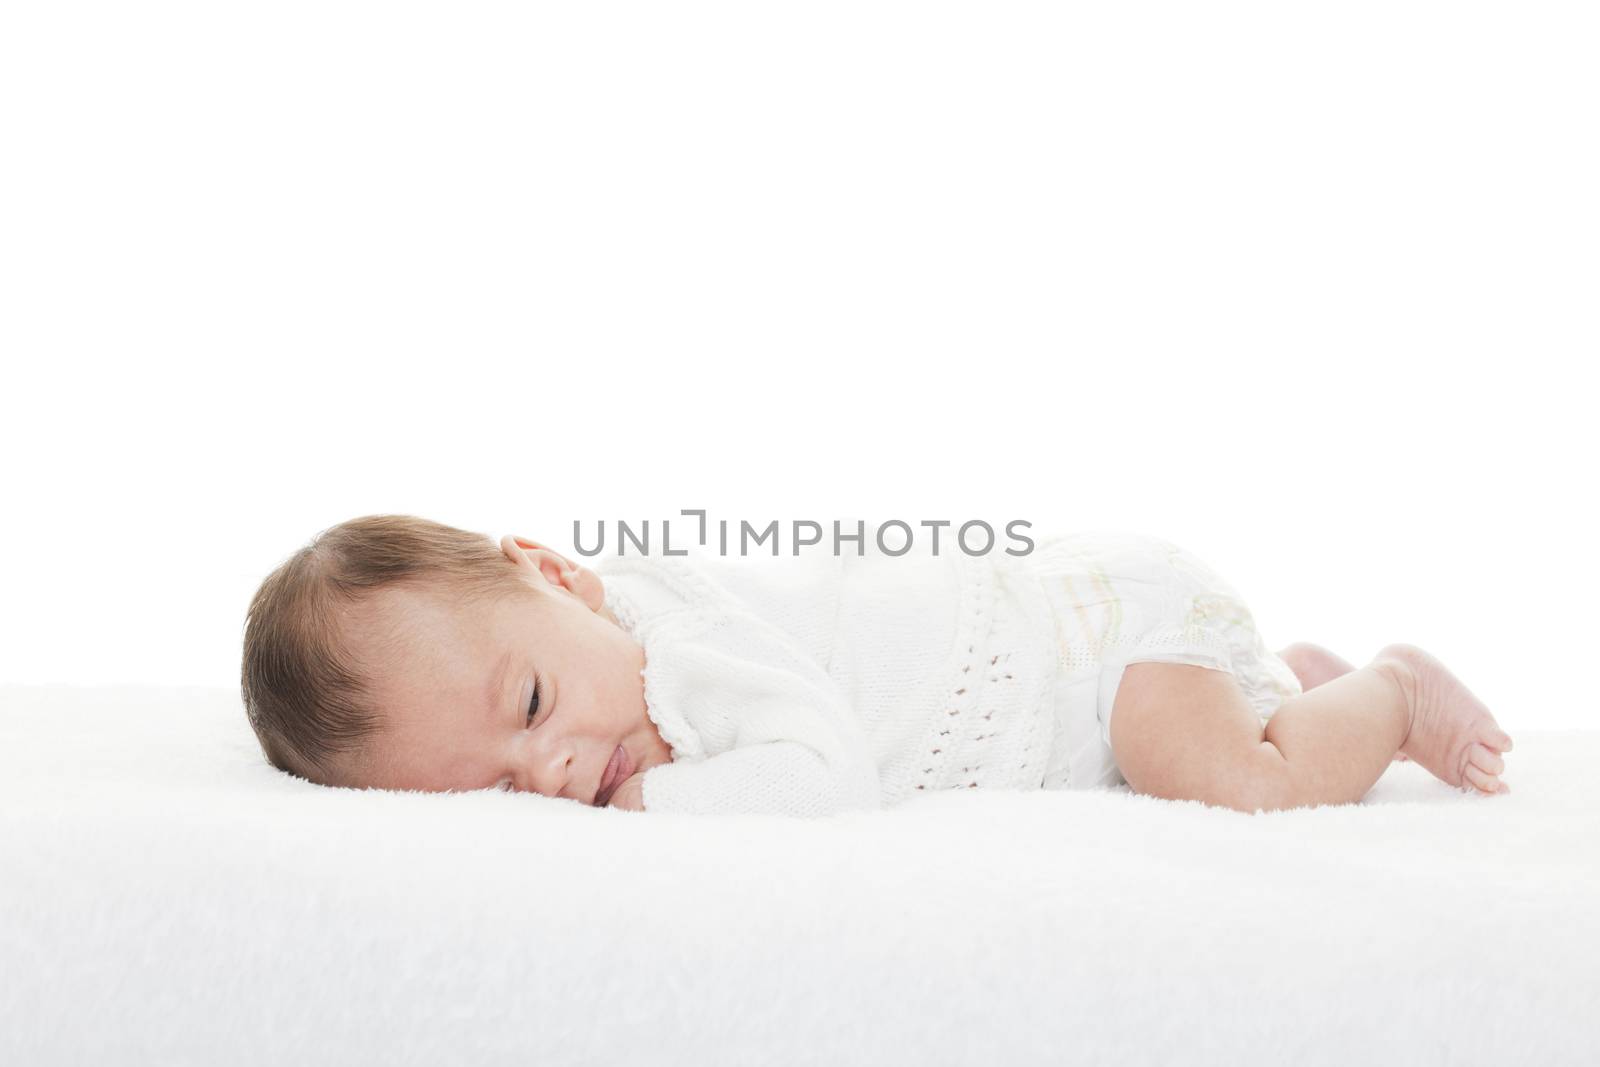 A newborn infant about to take a nap.  Mixed race baby shot on white background.